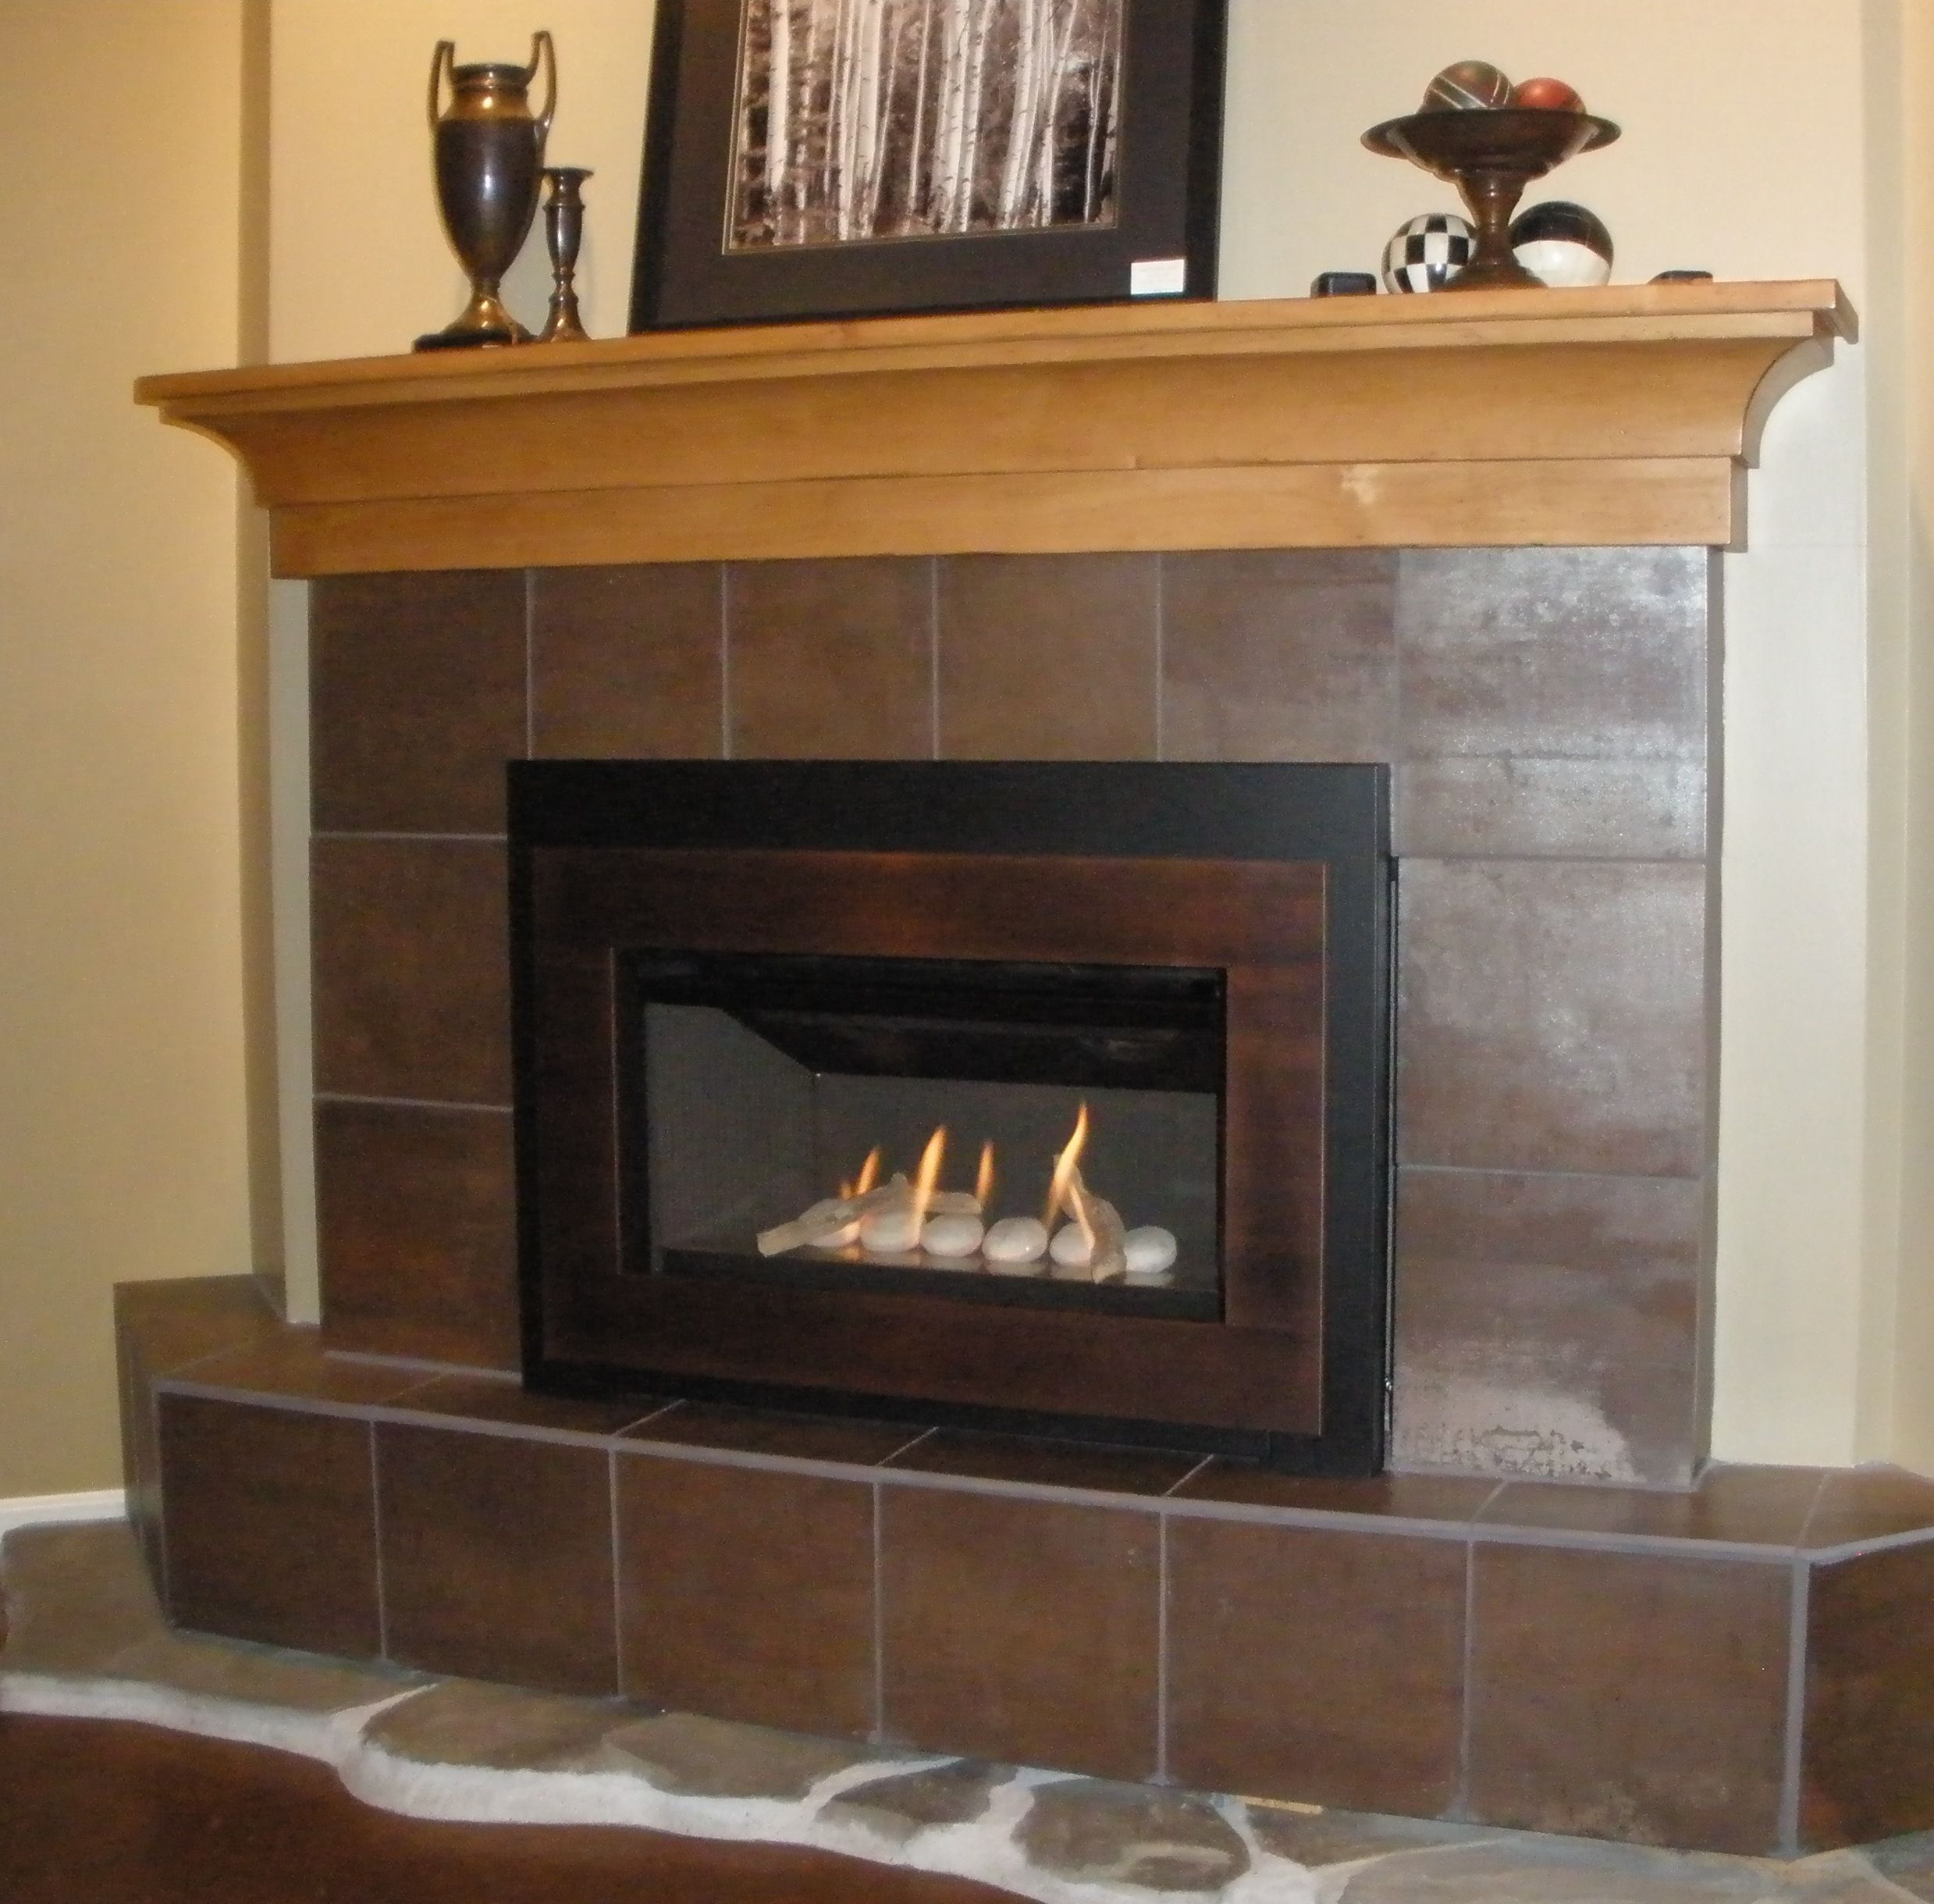 Gas Fireplace Sizes Awesome Pin On Valor Radiant Gas Fireplaces Midwest Dealer